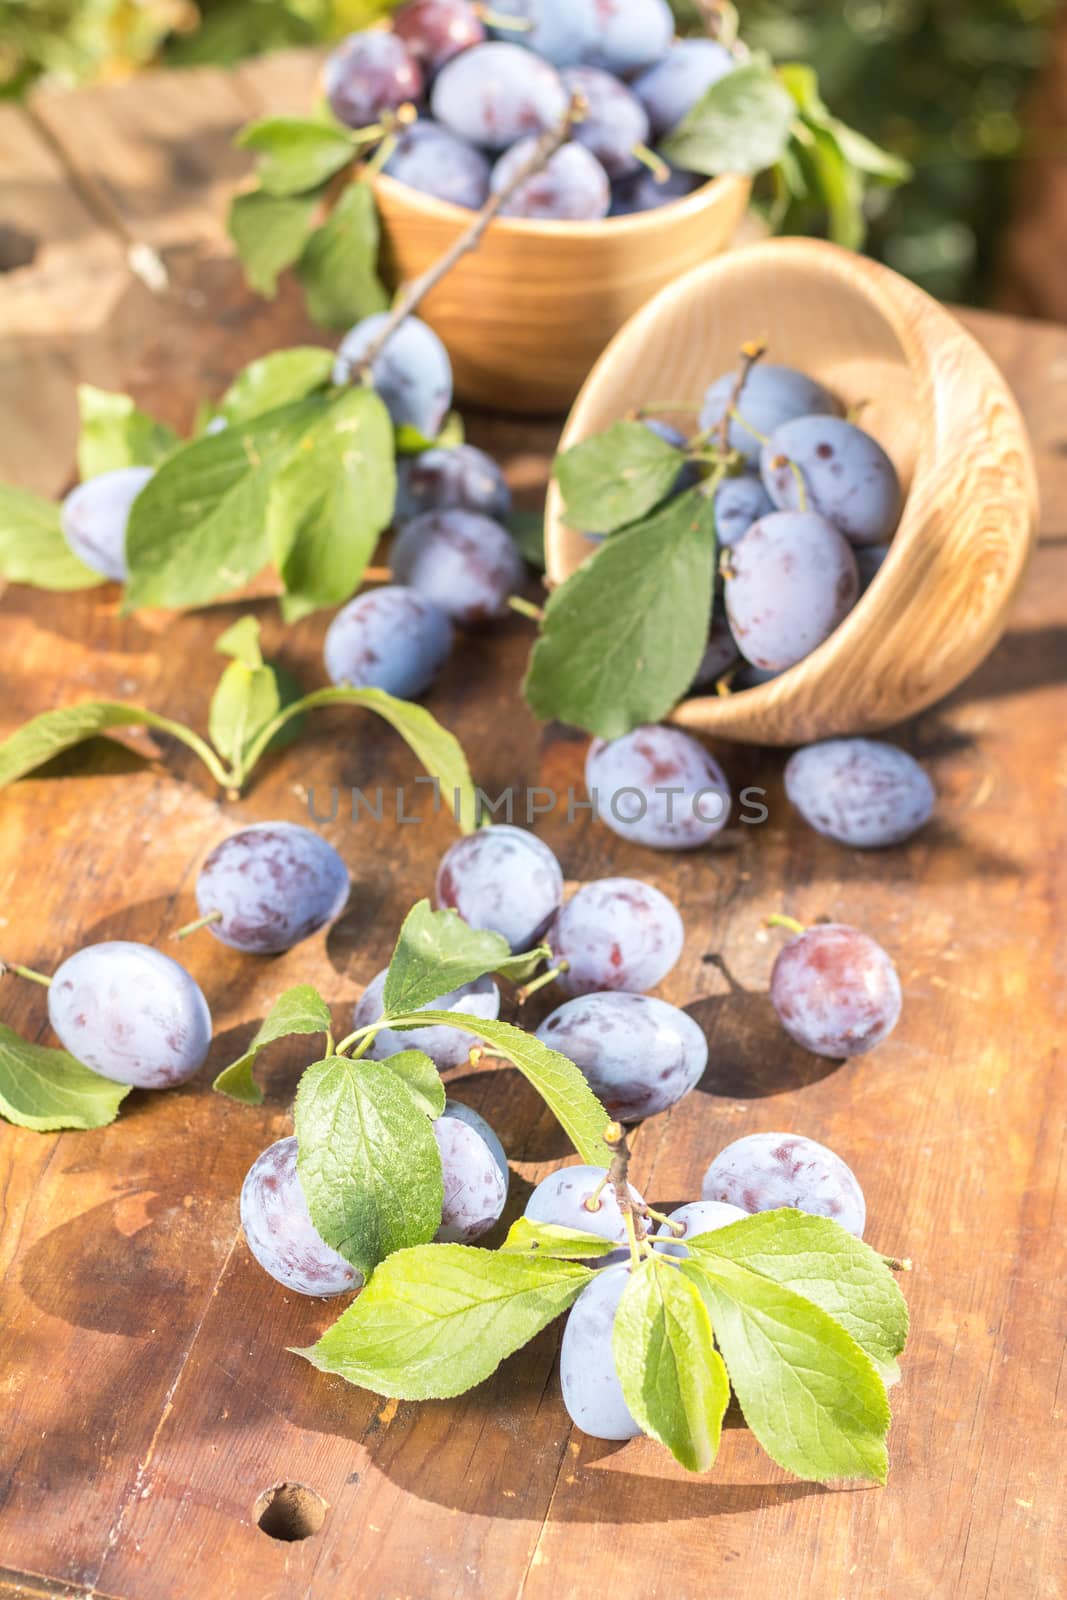 Fresh plums on wooden table in sunny day in garden by ArtSvitlyna